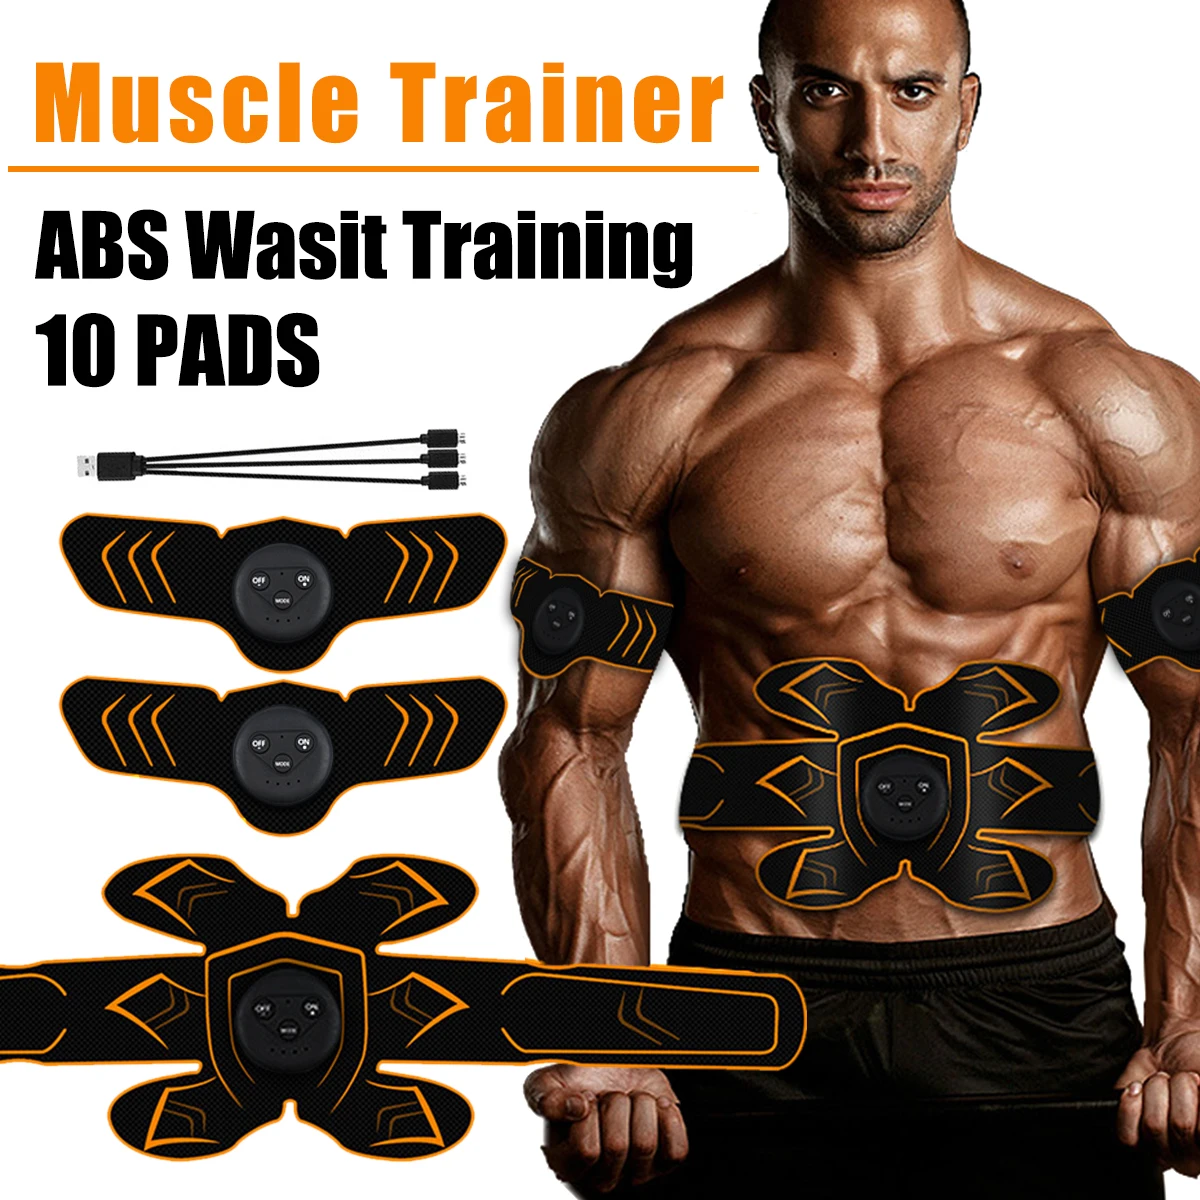 

Abdominal Muscle Stimulator EMS Abs Fitness Equipment Training Gear Muscles Trainer Home Gym Exercise Fitness Weight Loss